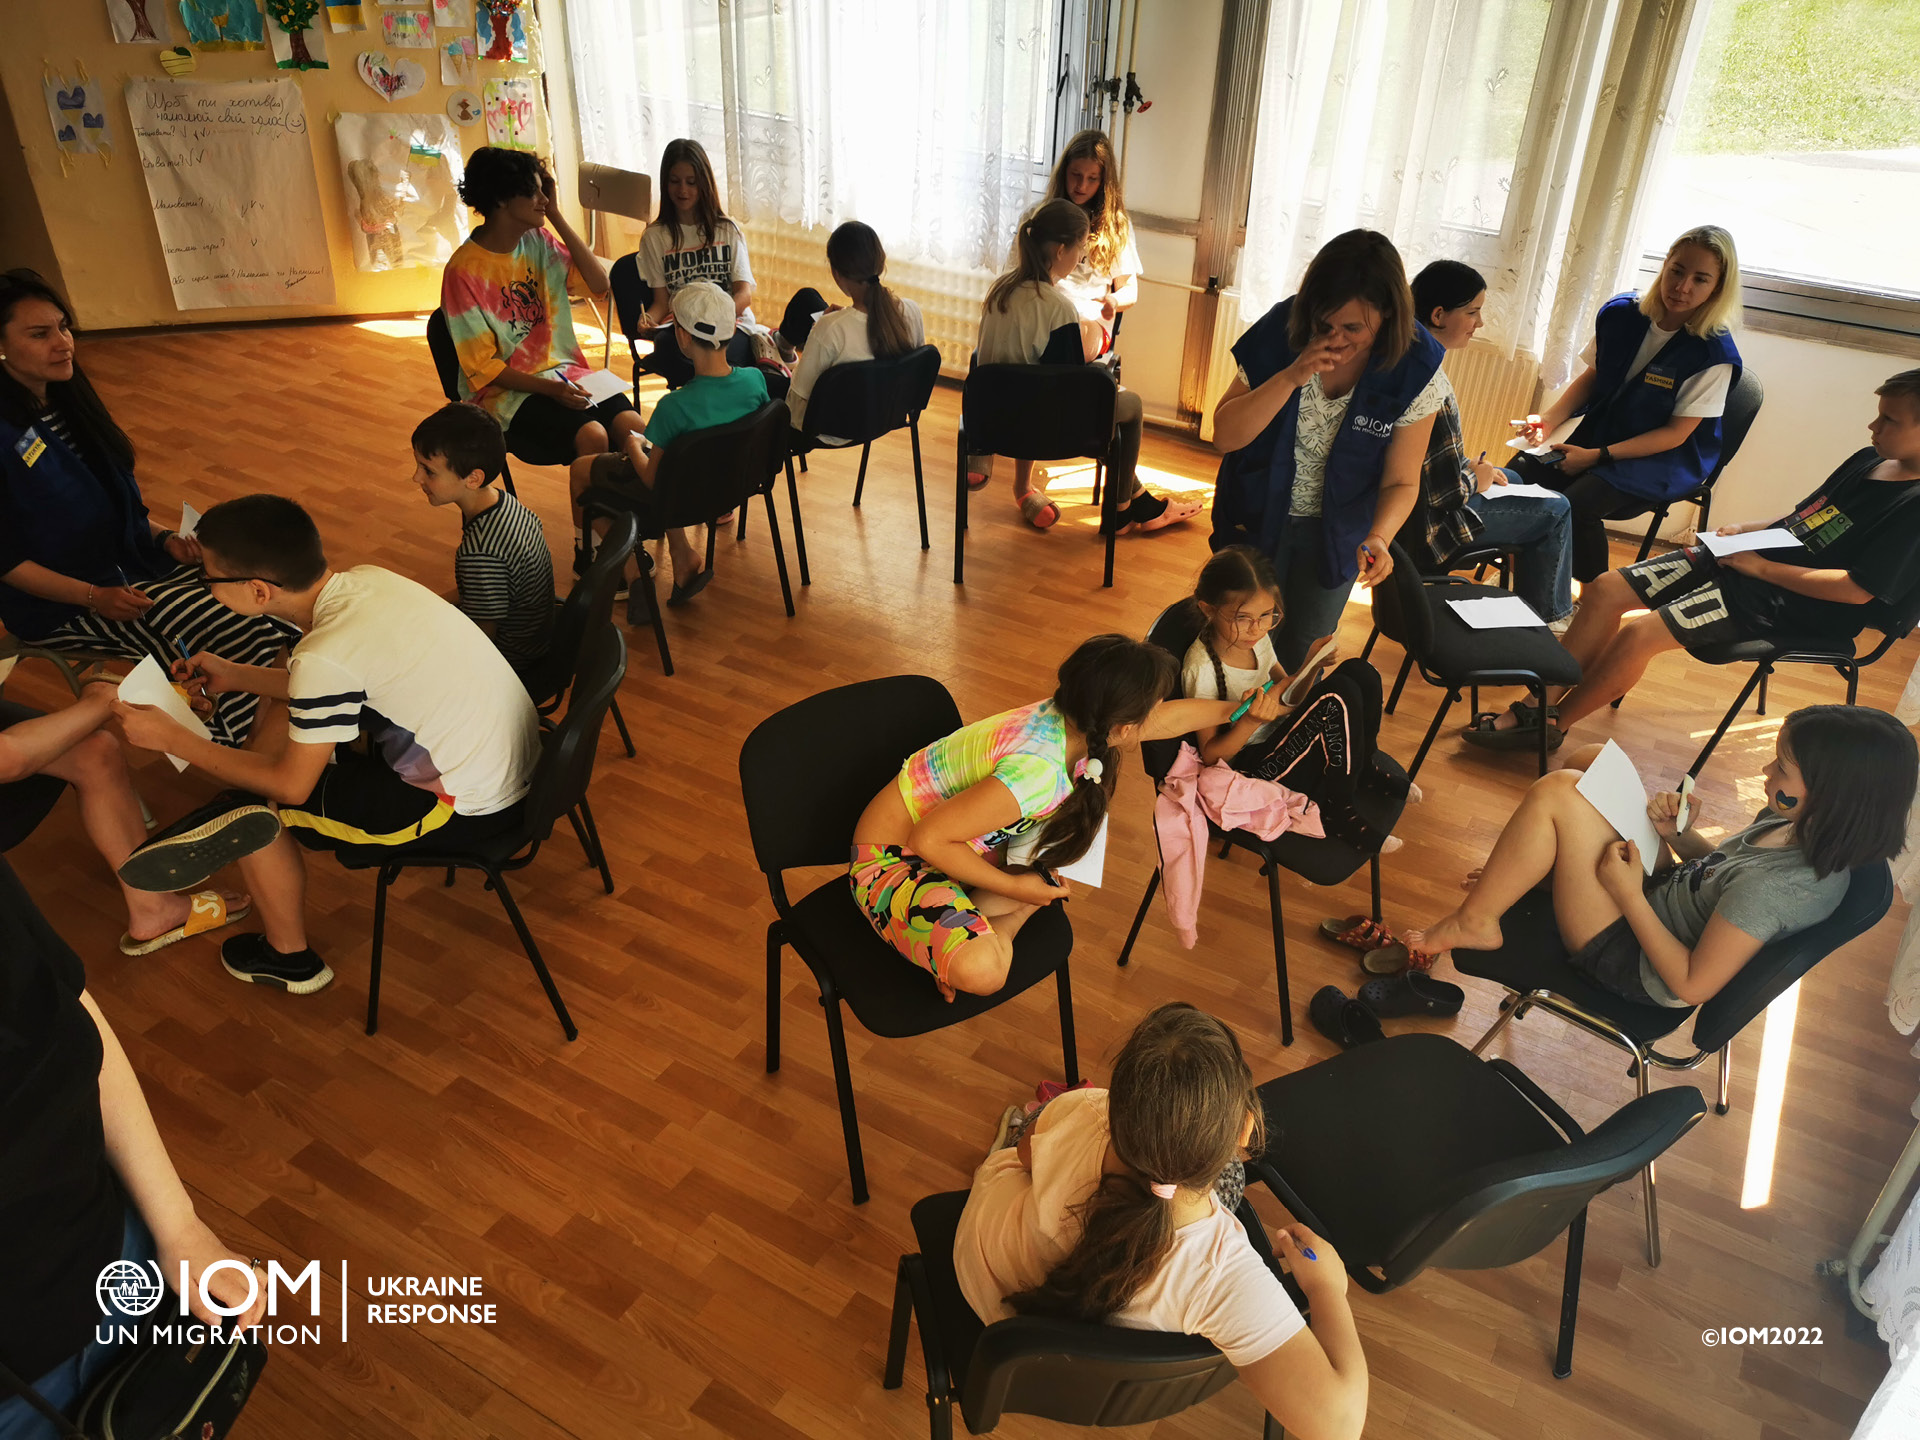 IOM conducts Mood Workshops for displaced youth from Ukraine in the Gabcikovo Accomodation Facility. Photo © International Organization for Migration (IOM) 2022.